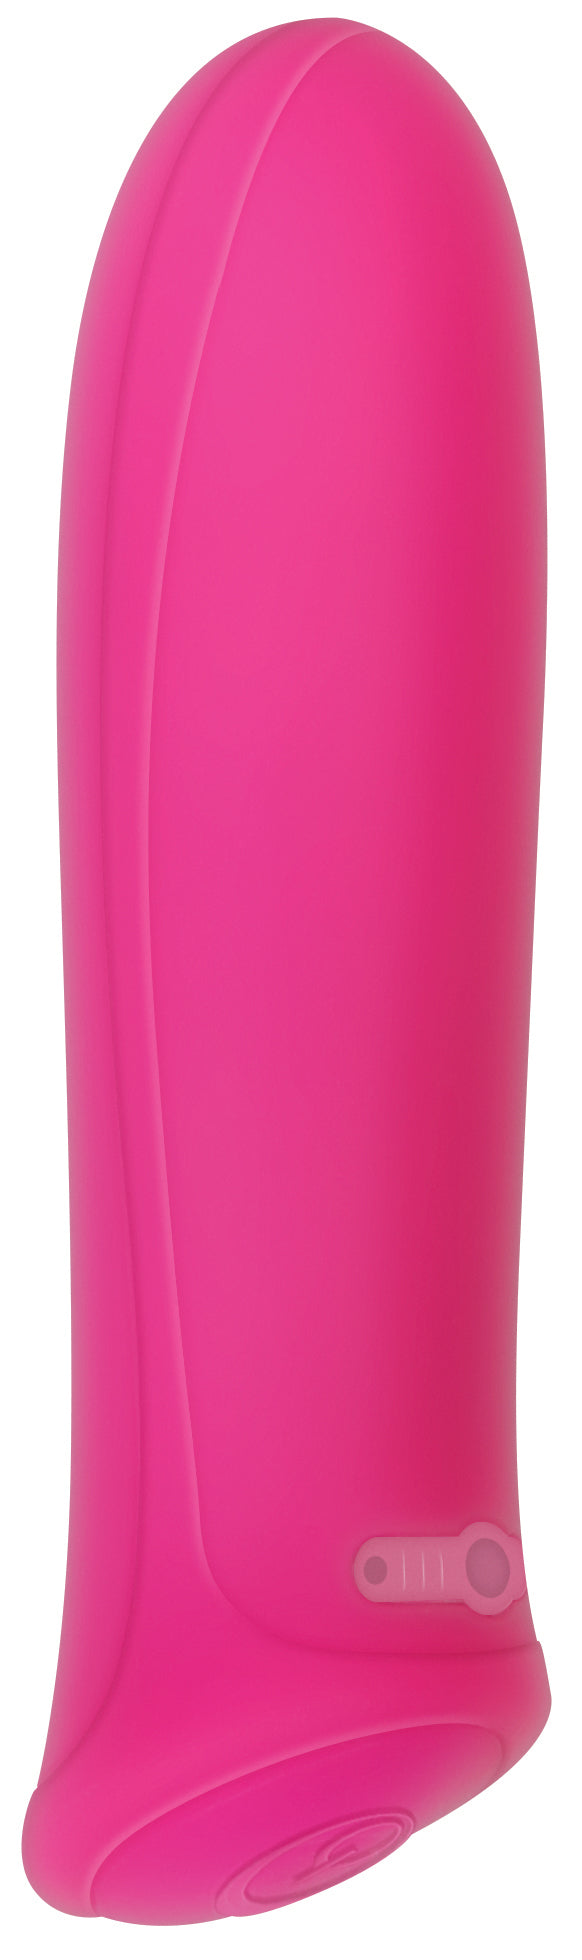 Intense Pleasure: Rechargeable Bullet Vibrator with 7 Speeds Pink